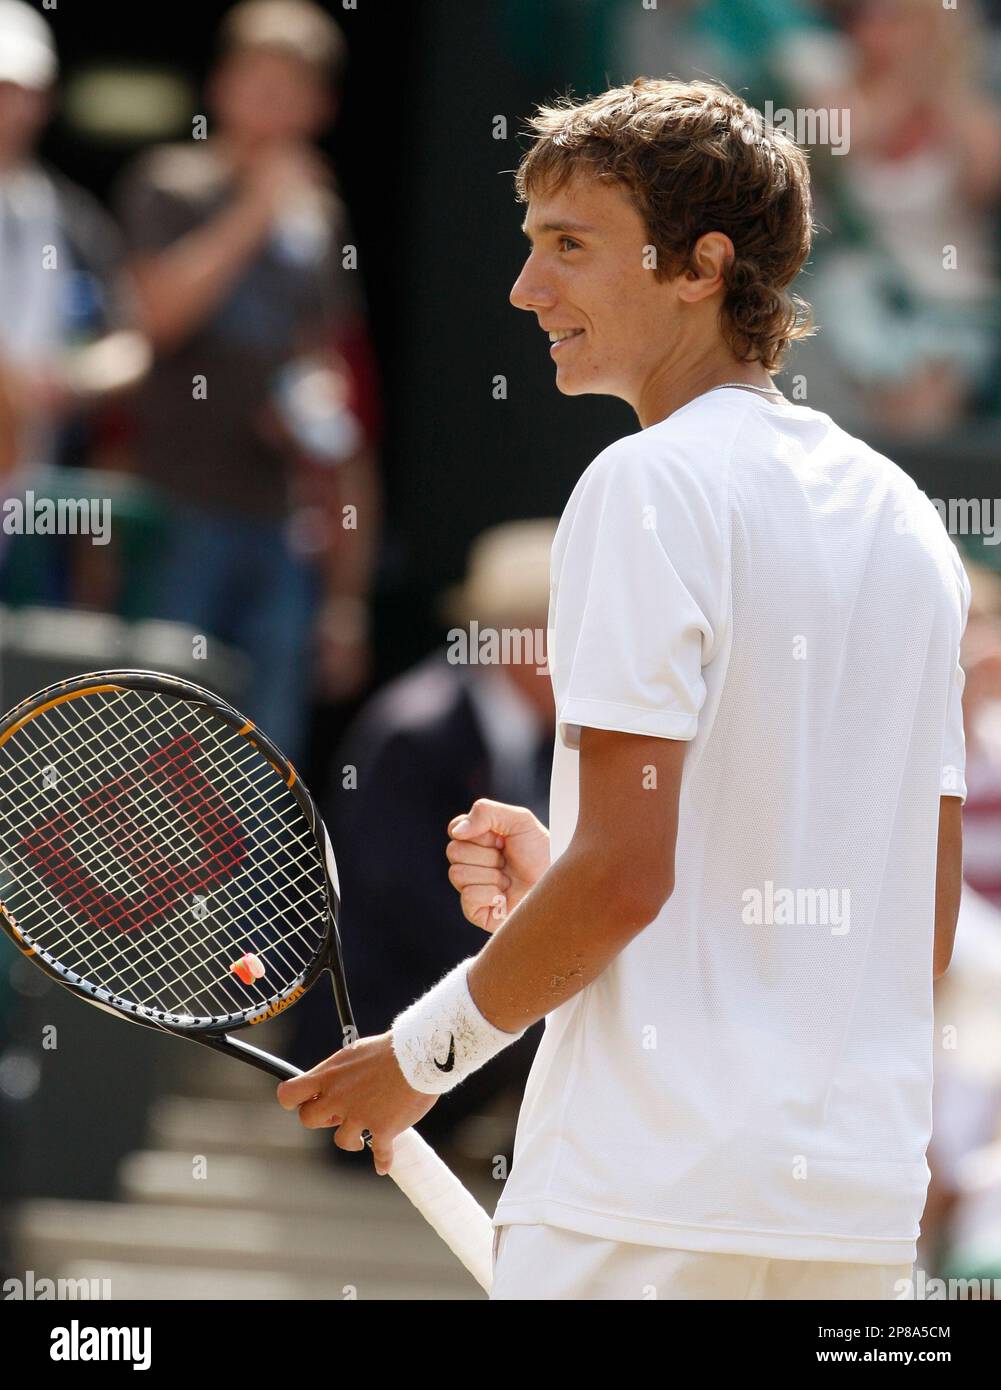 Andrey Kuznetsov of Russia reacts at match point defeating Jordan Cox of  U.S. during their boys final match on court No. 1 at Wimbledon, Sunday,  July 5, 2009. (AP Photo/Kirsty Wigglesworth Stock